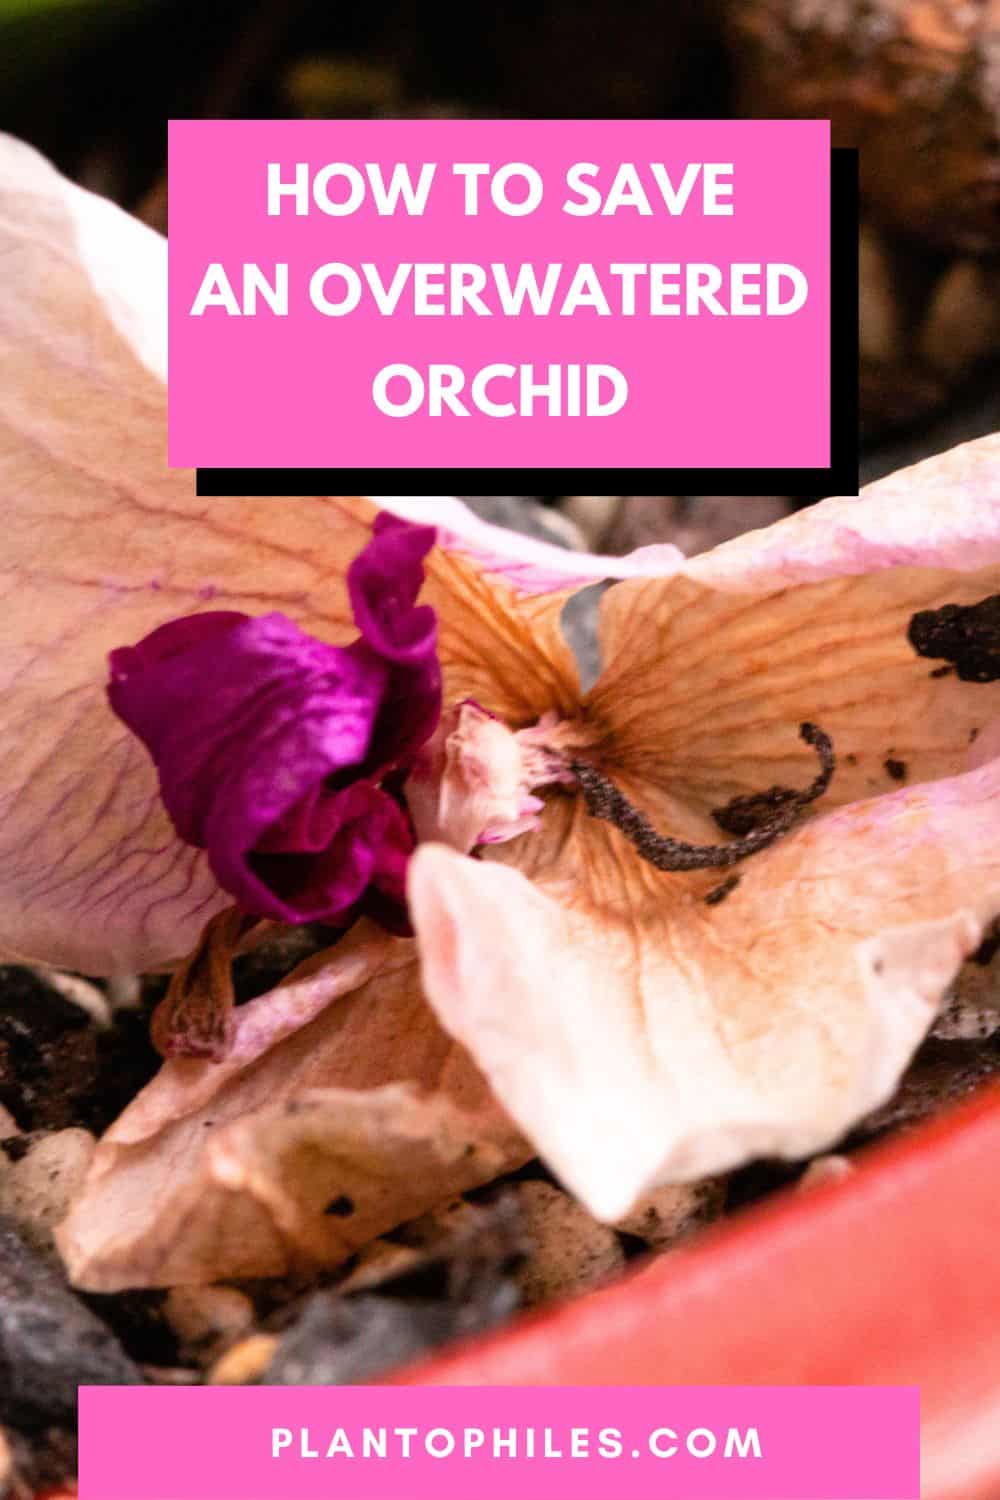 How to Save an Overwatered Orchid